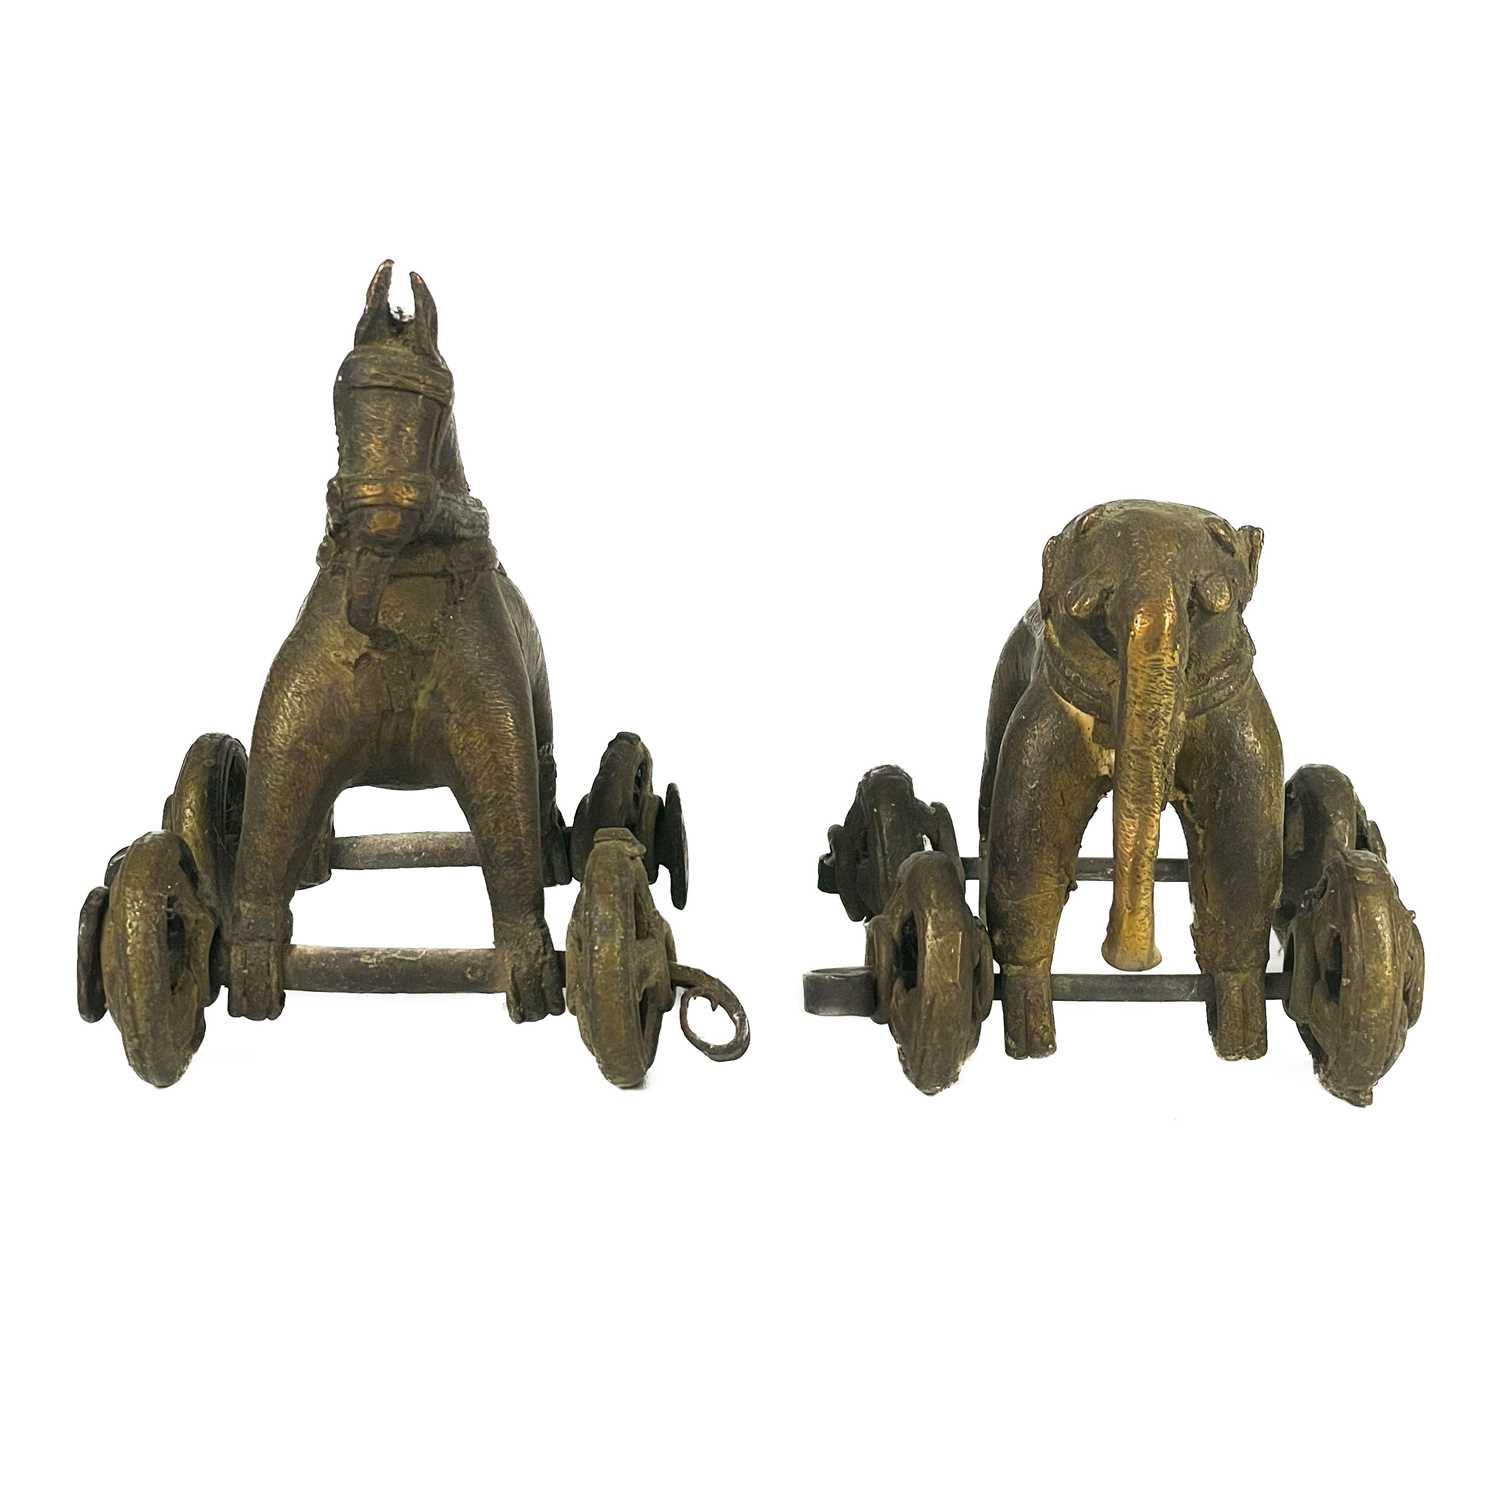 Two Indian bronze temple toys, circa 1900. - Image 2 of 4